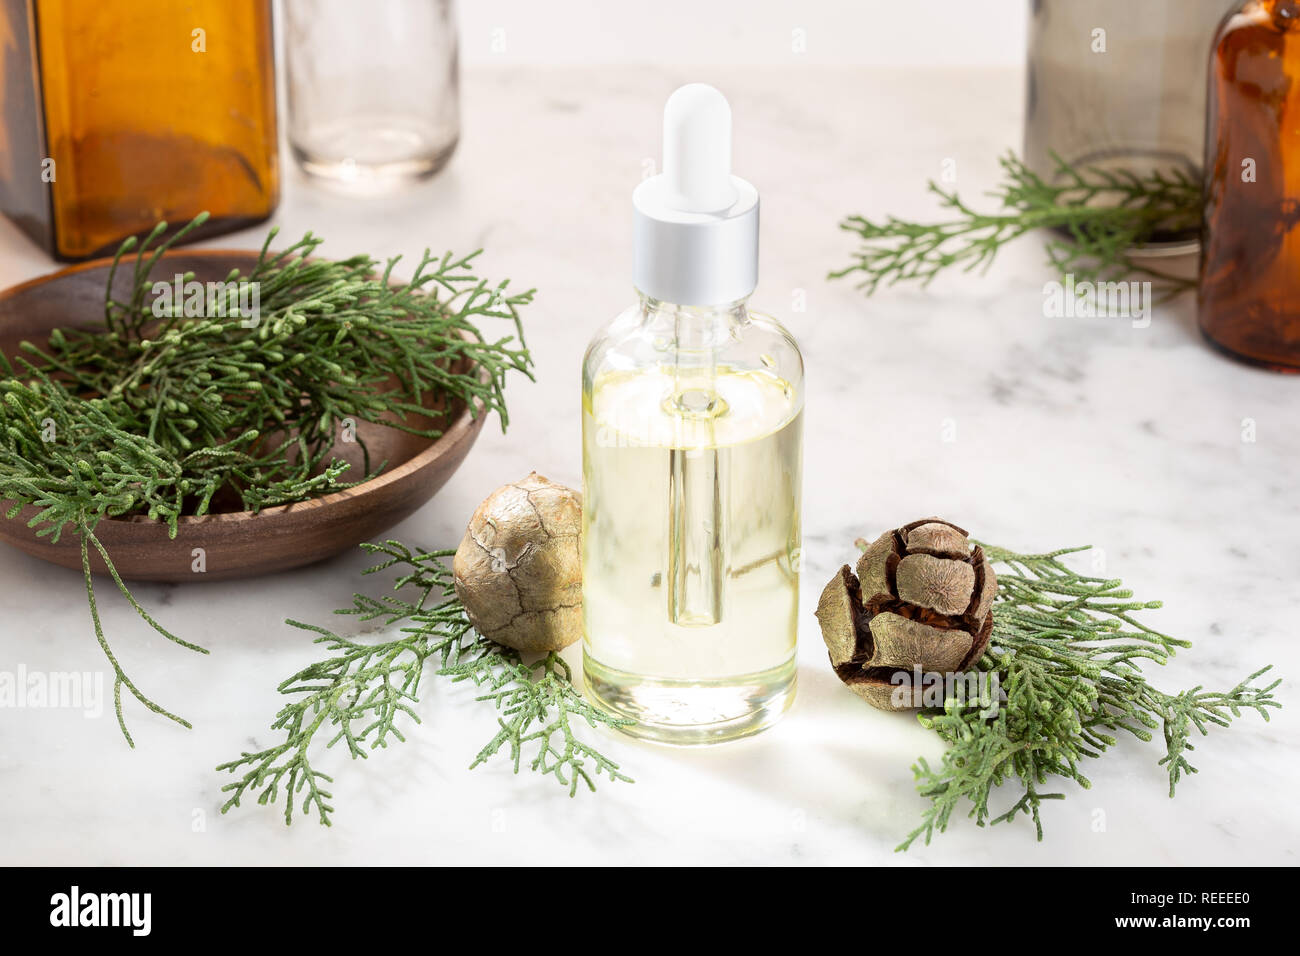 Cypress essential oil. Cypress oil on glass bottle for beauty, skin care, wellness. Alternative medicine Stock Photo